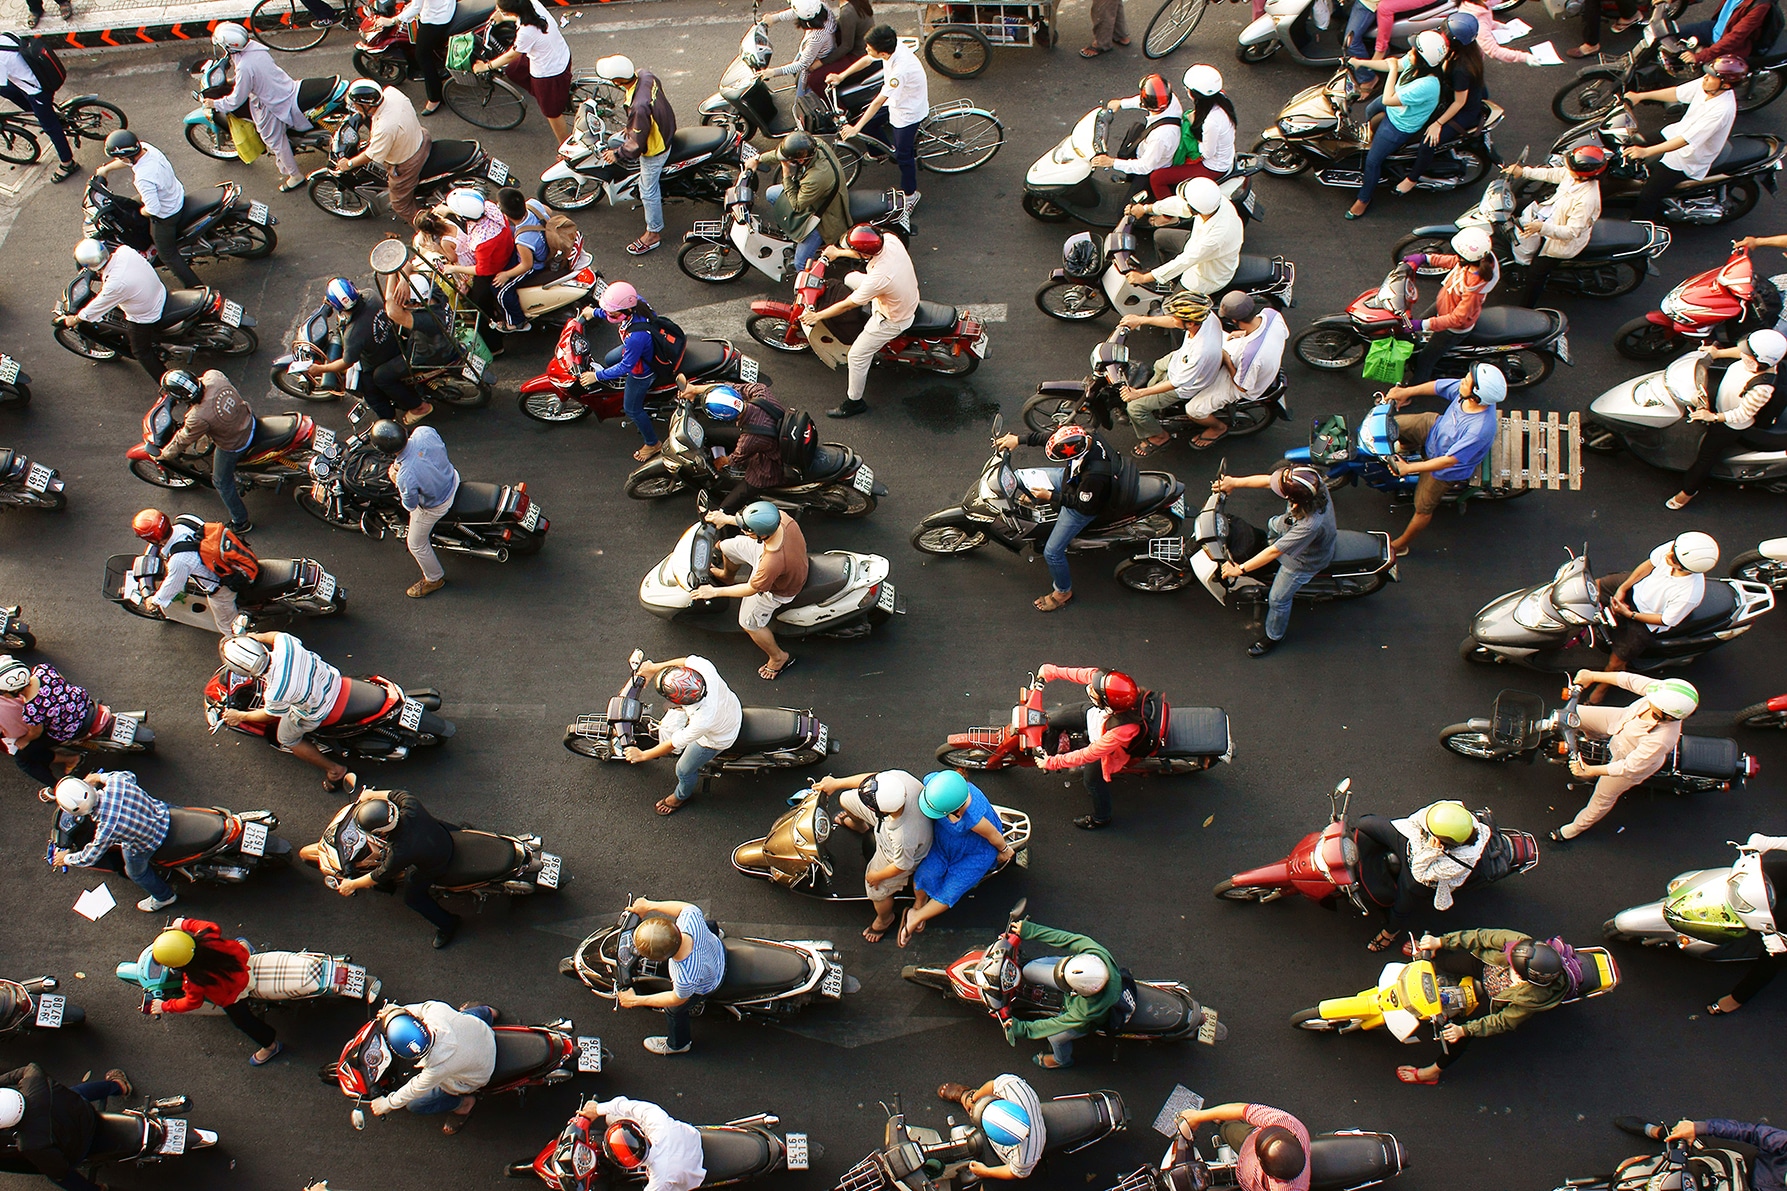 Ariel view of a lot of people on motorbikes